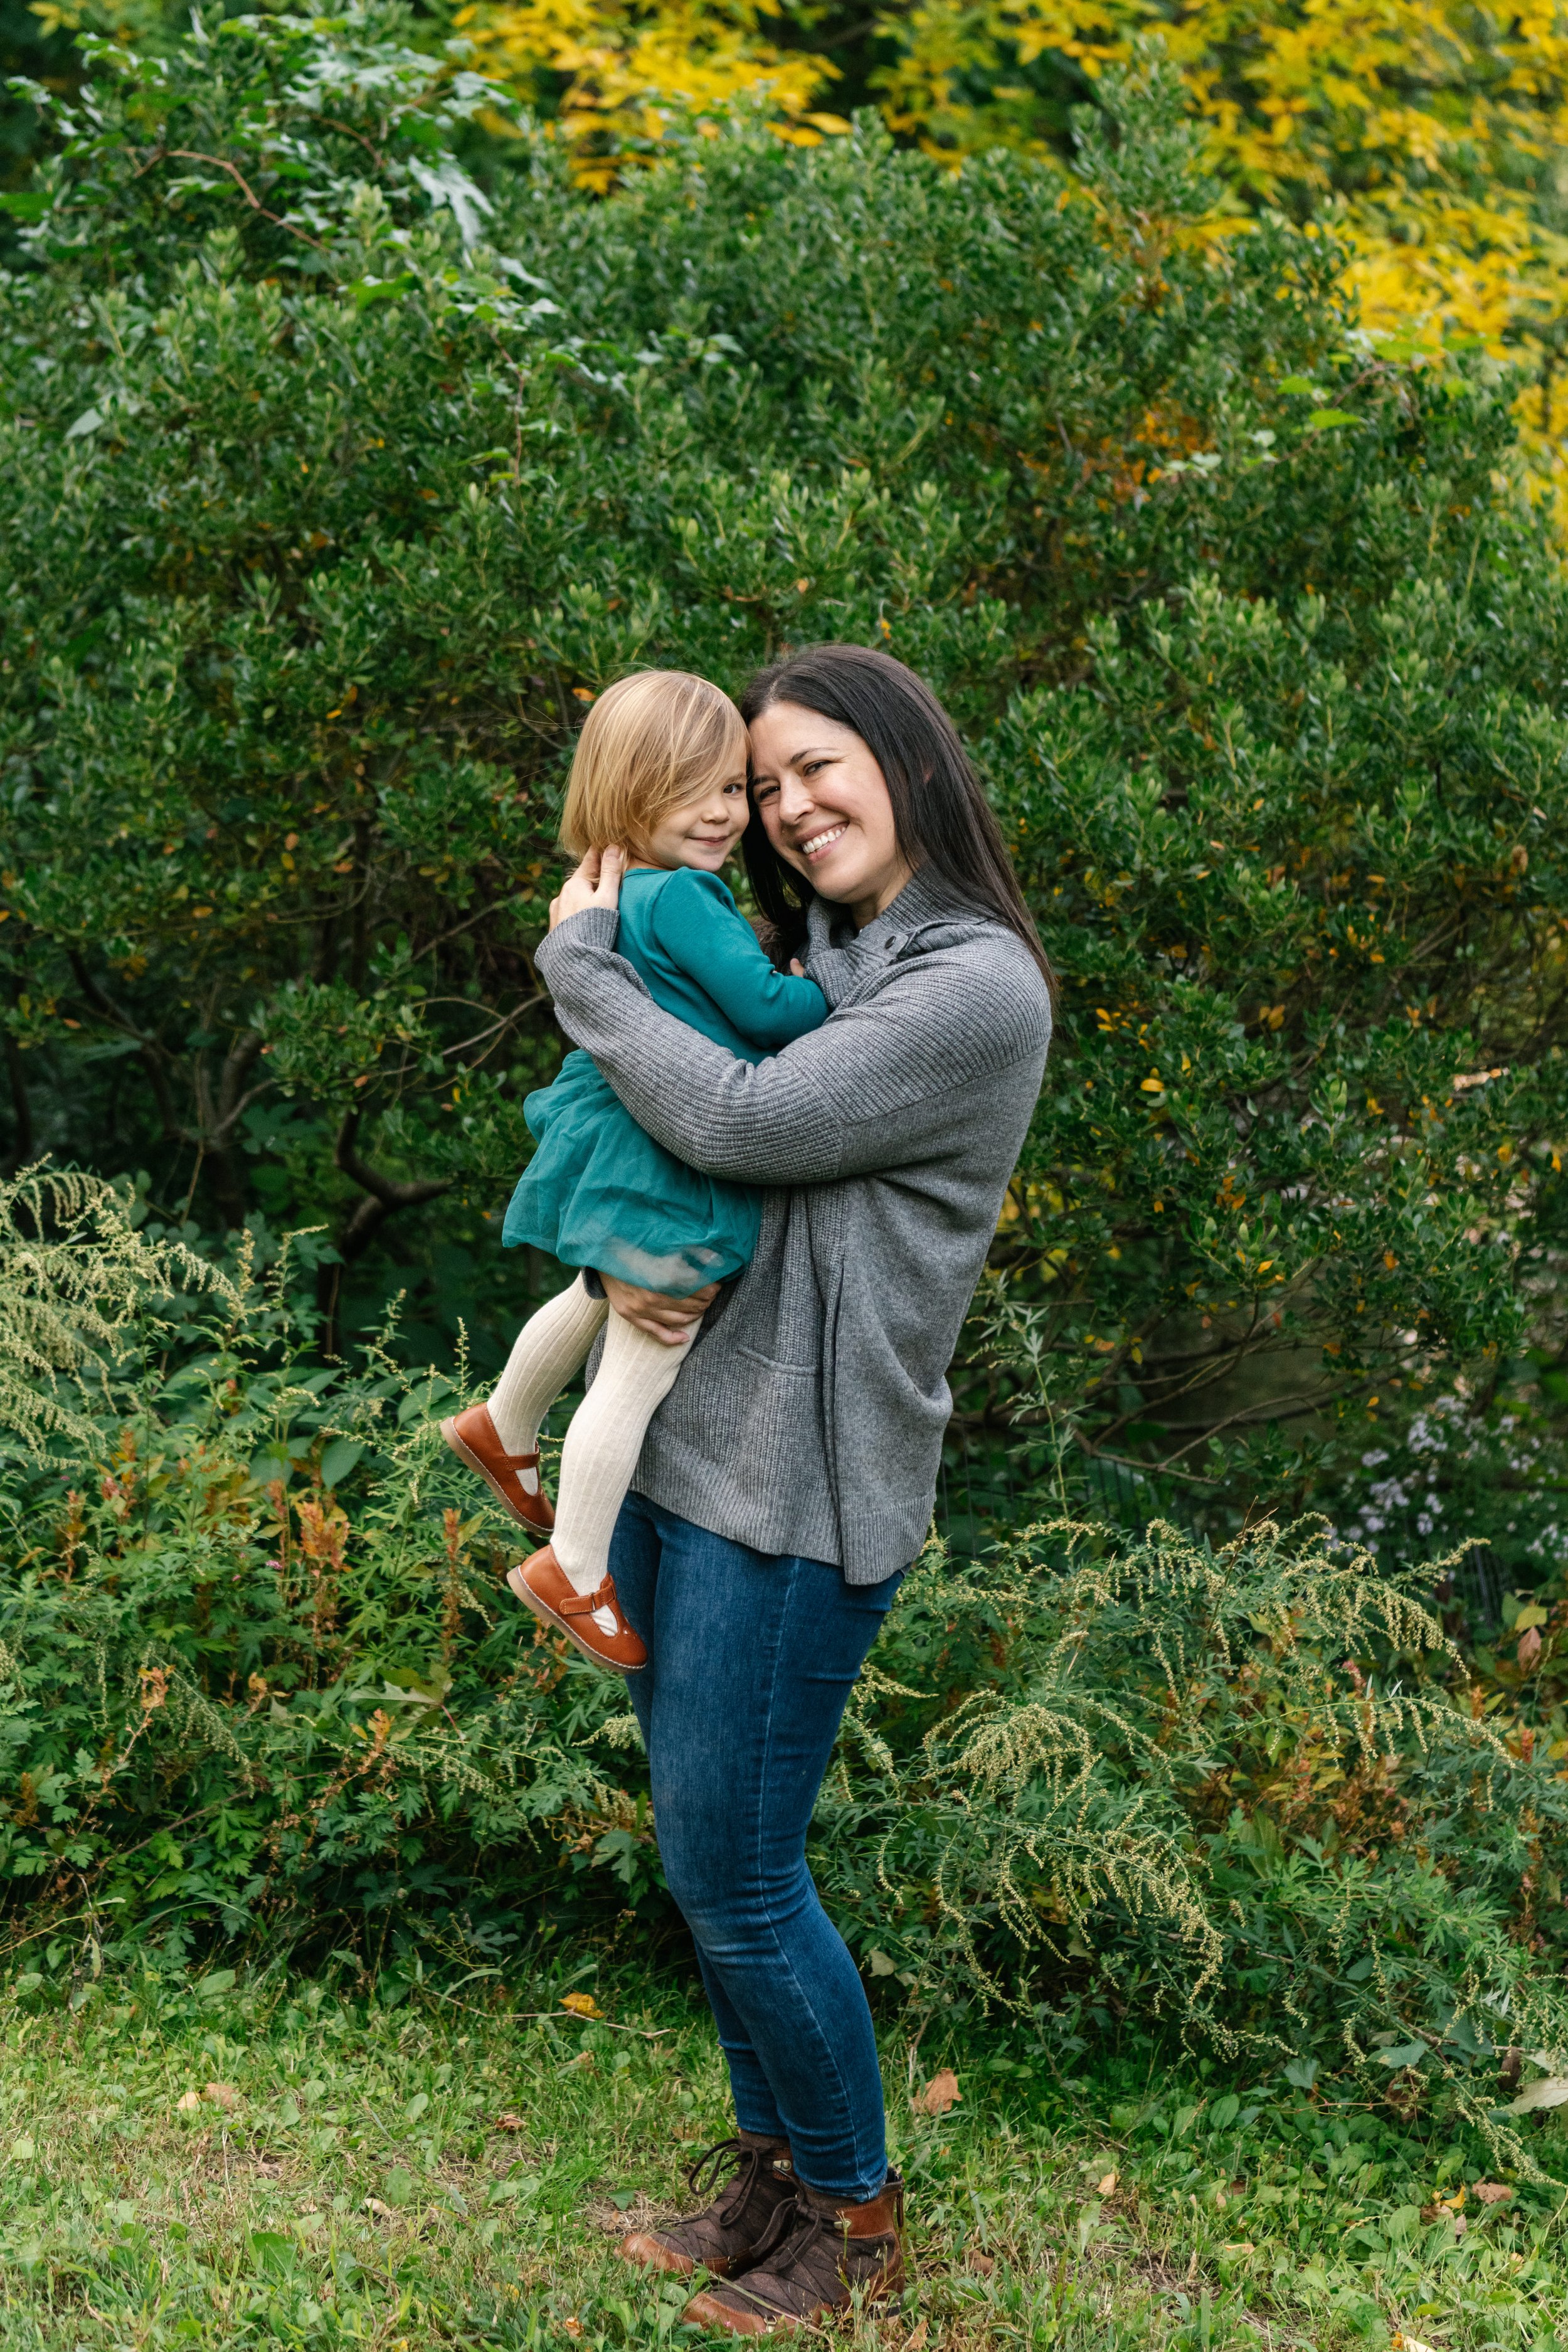  Family Photographer Nicole Hawkins photography captures a mother and child portrait in the middle of Central Park. green dress tights brown shoes jeans and gray shirt style ideas #NicoleHawkinsPhotography #NicoleHawkinsFamilies #NJphotographers #fam